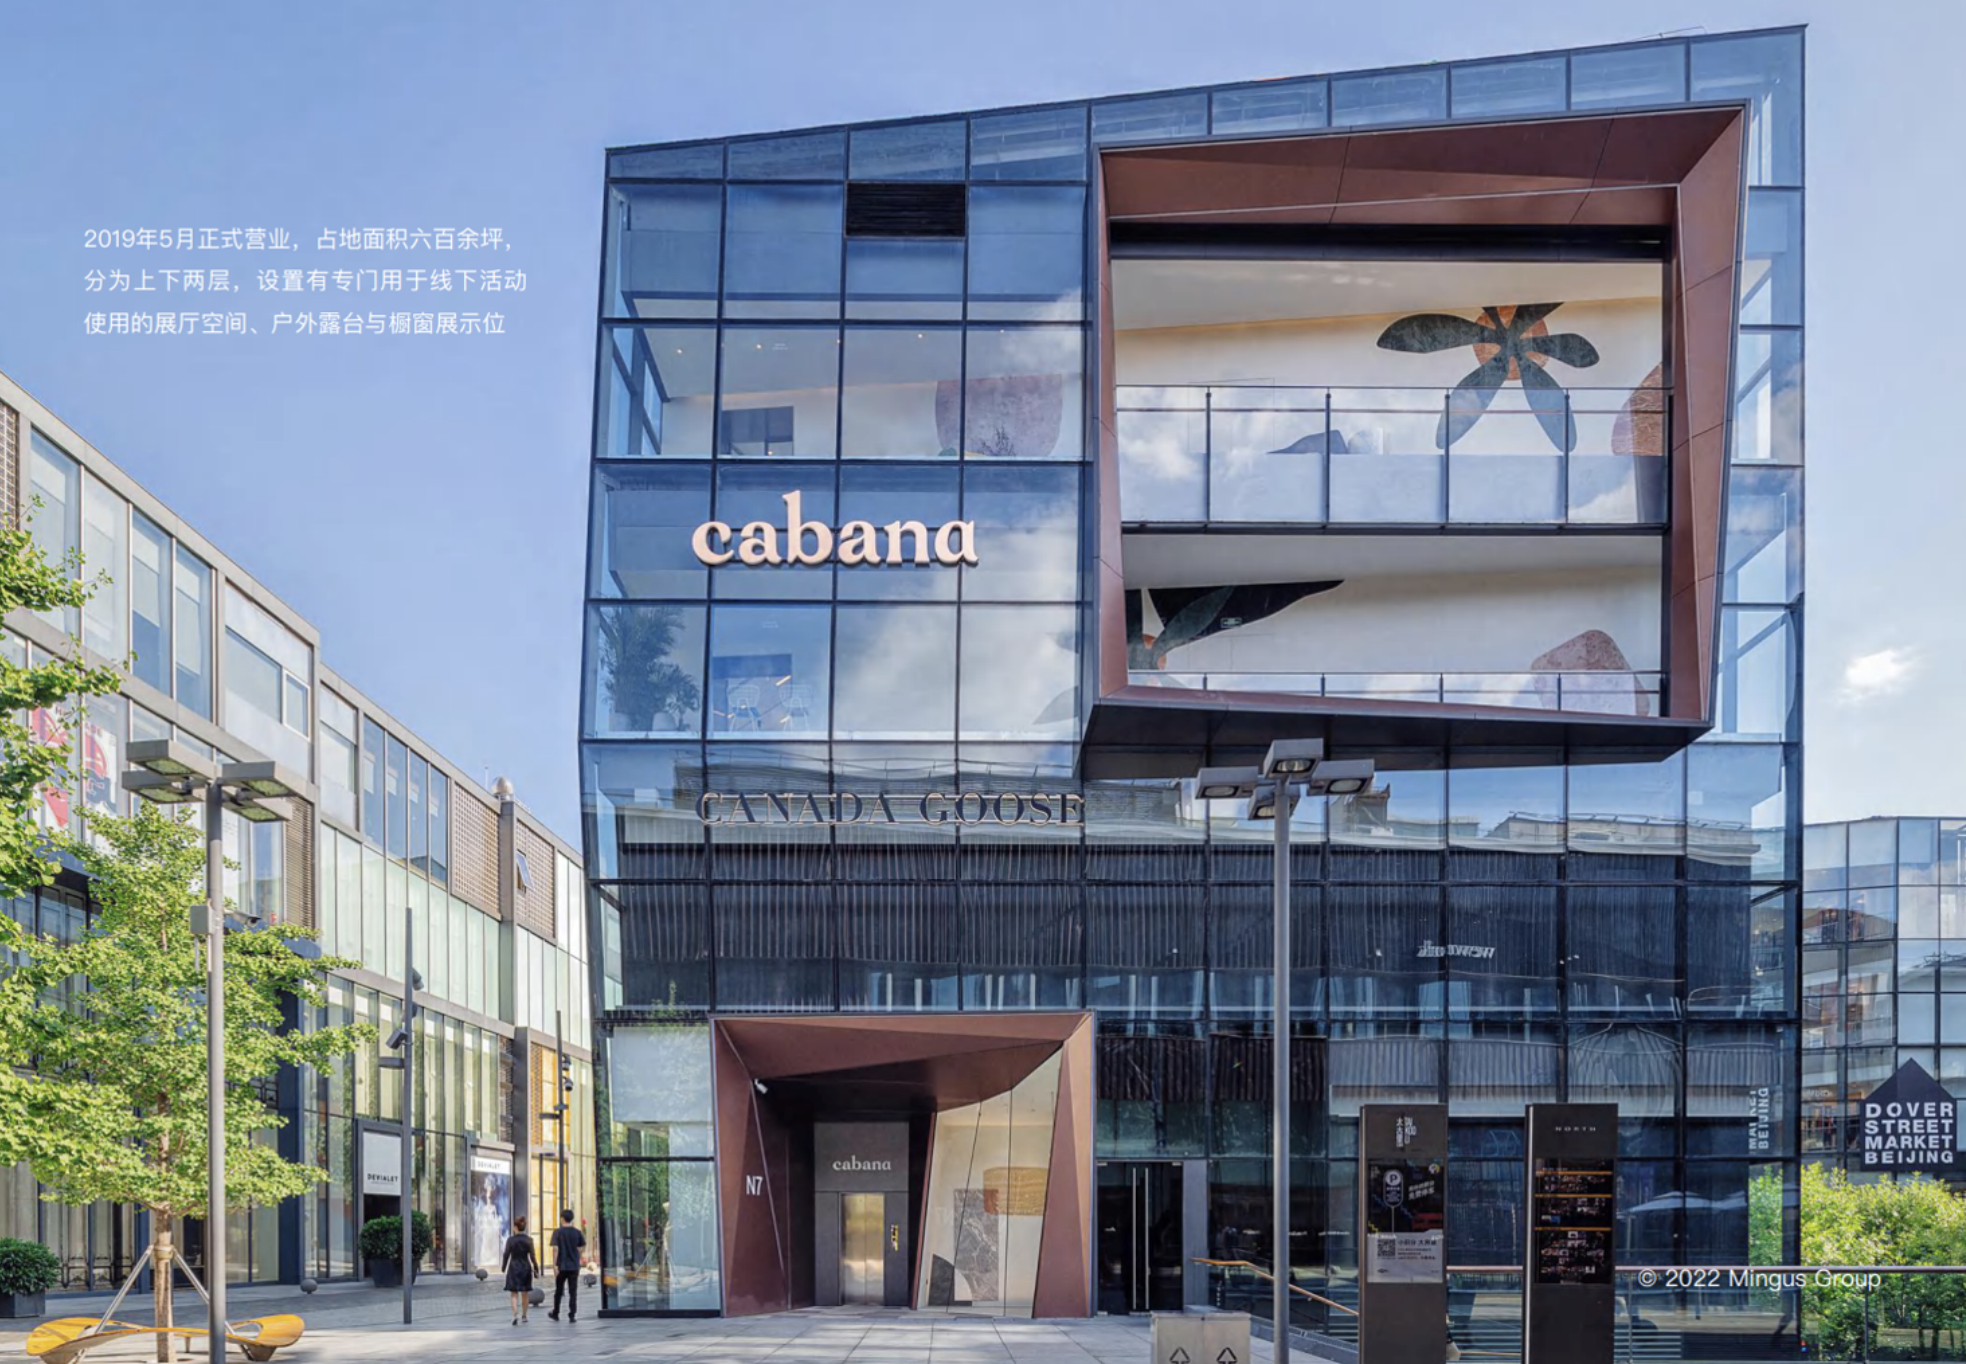 Cabana, the High-end Furniture Retailer: Trust Building With Global Brands